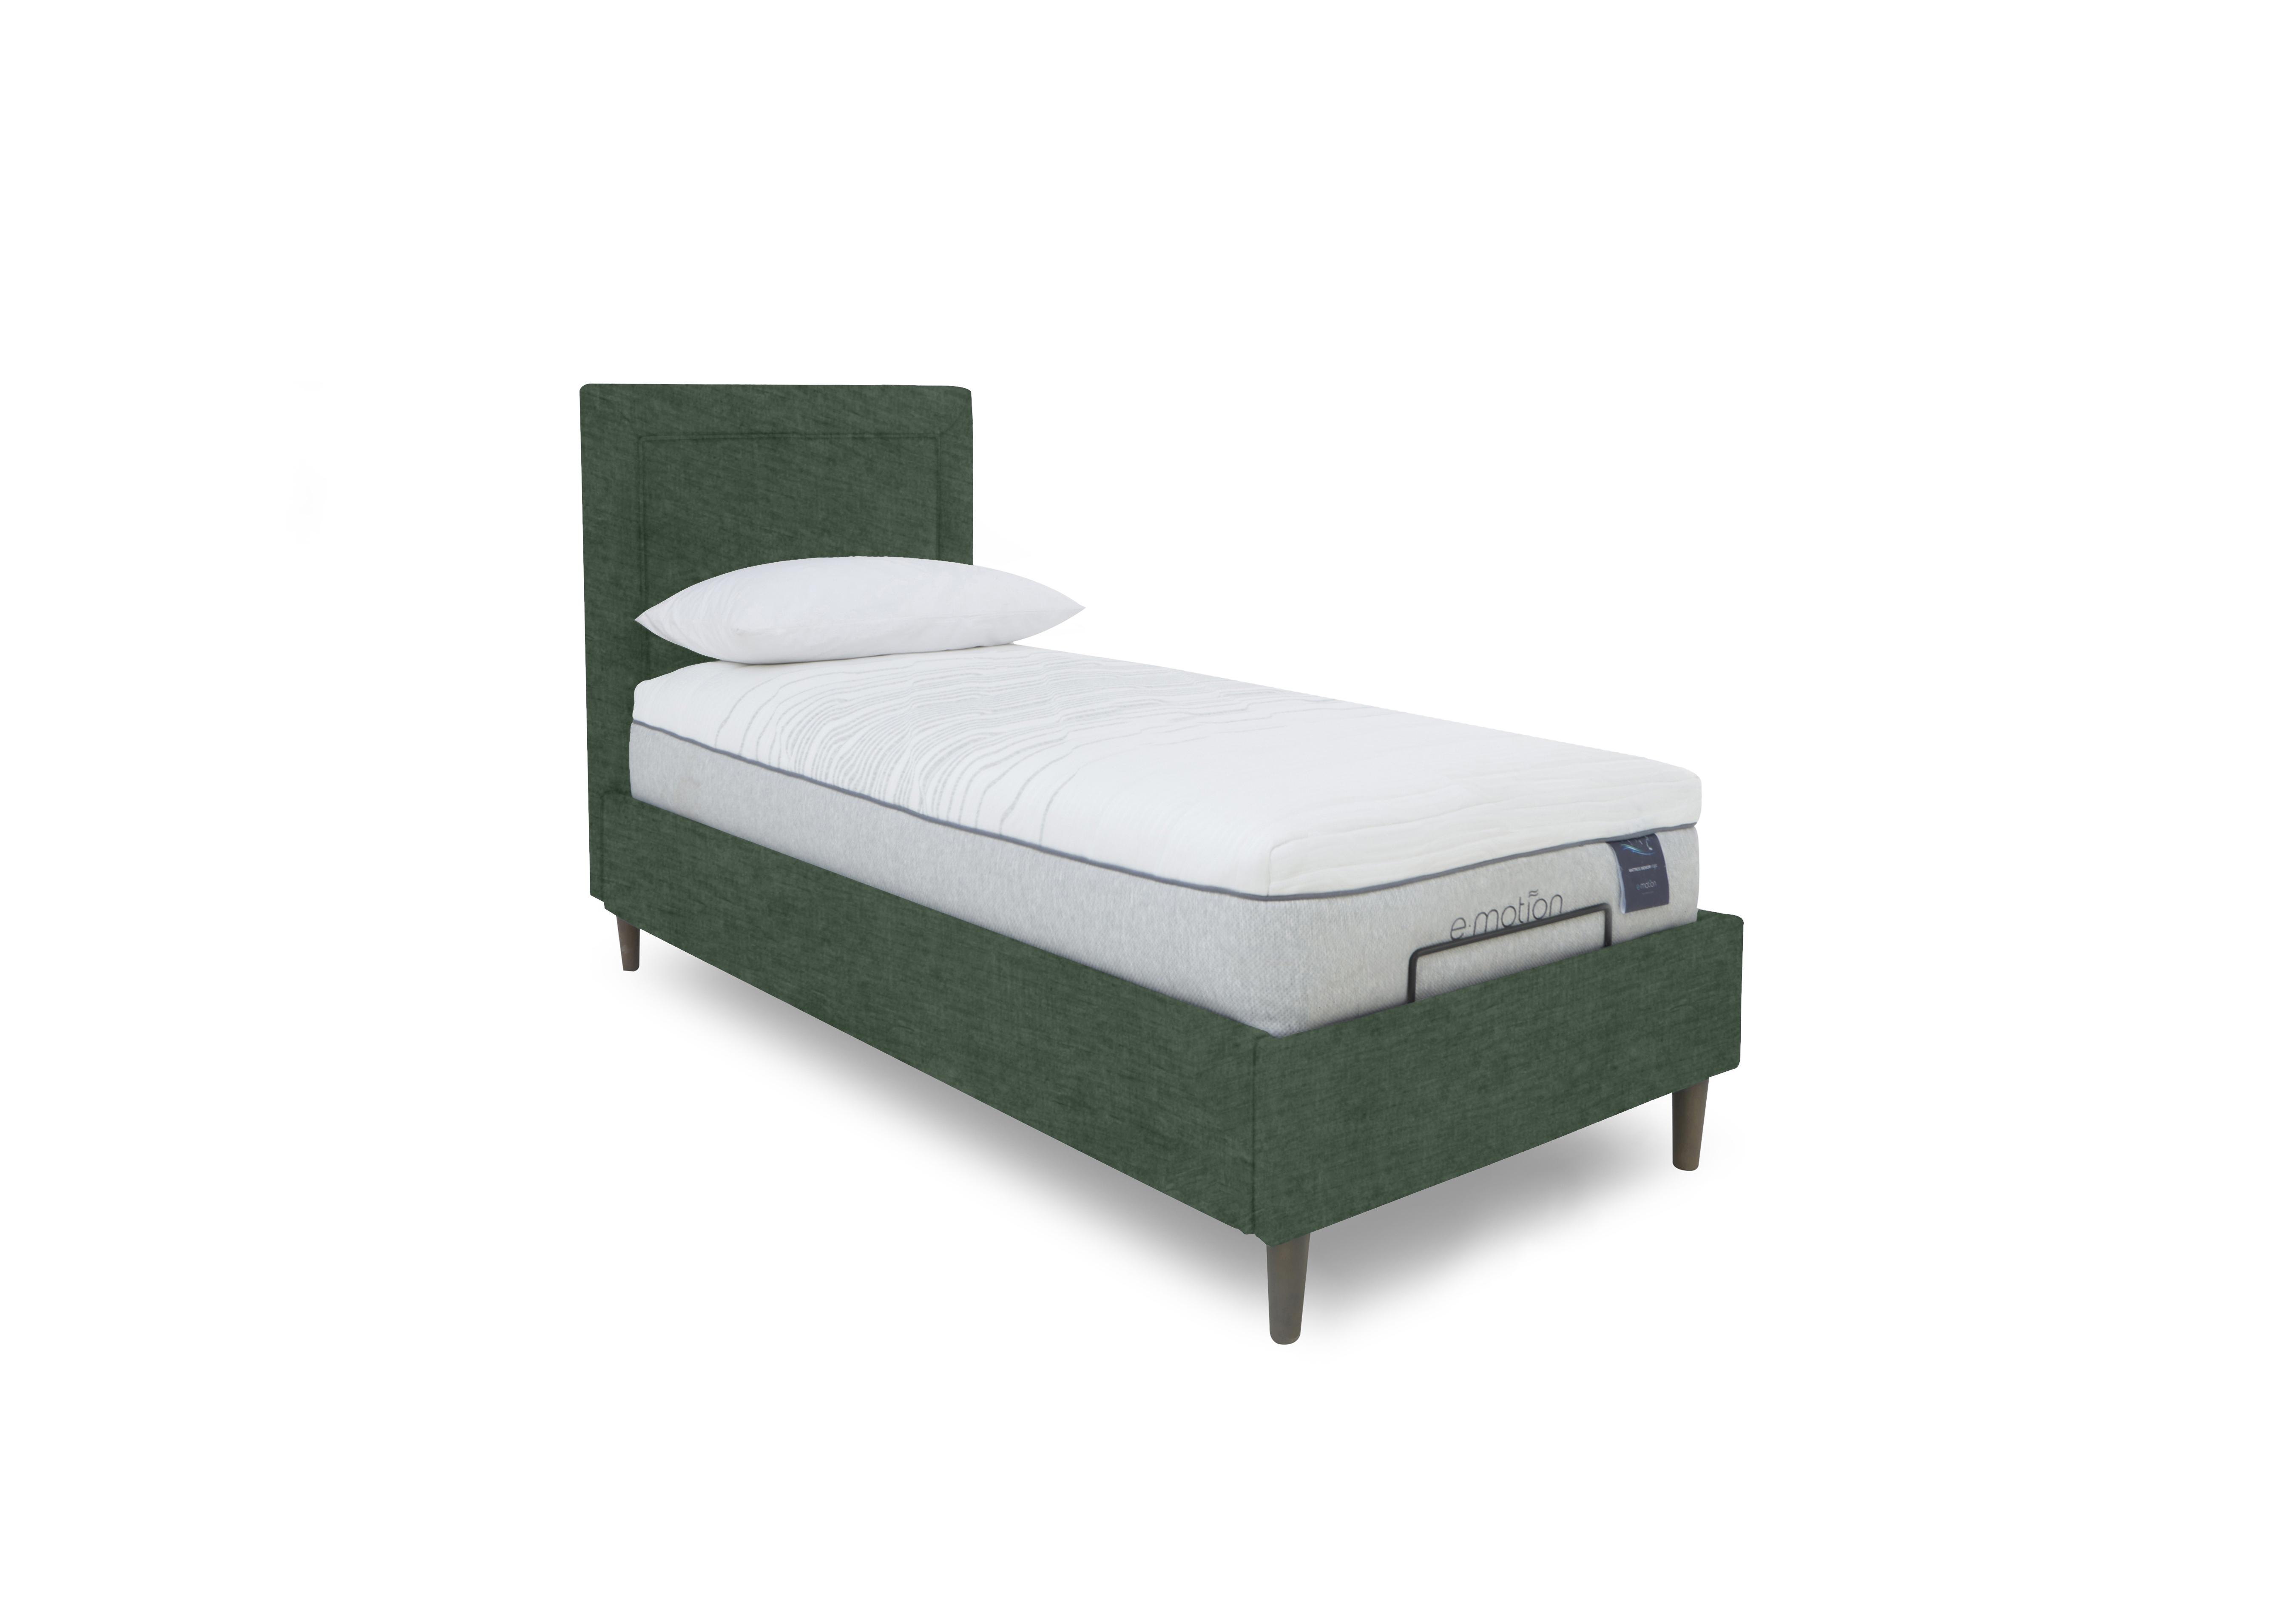 E-Motion Yumi Adjustable Bed Frame in 502 Tormaline Green on Furniture Village